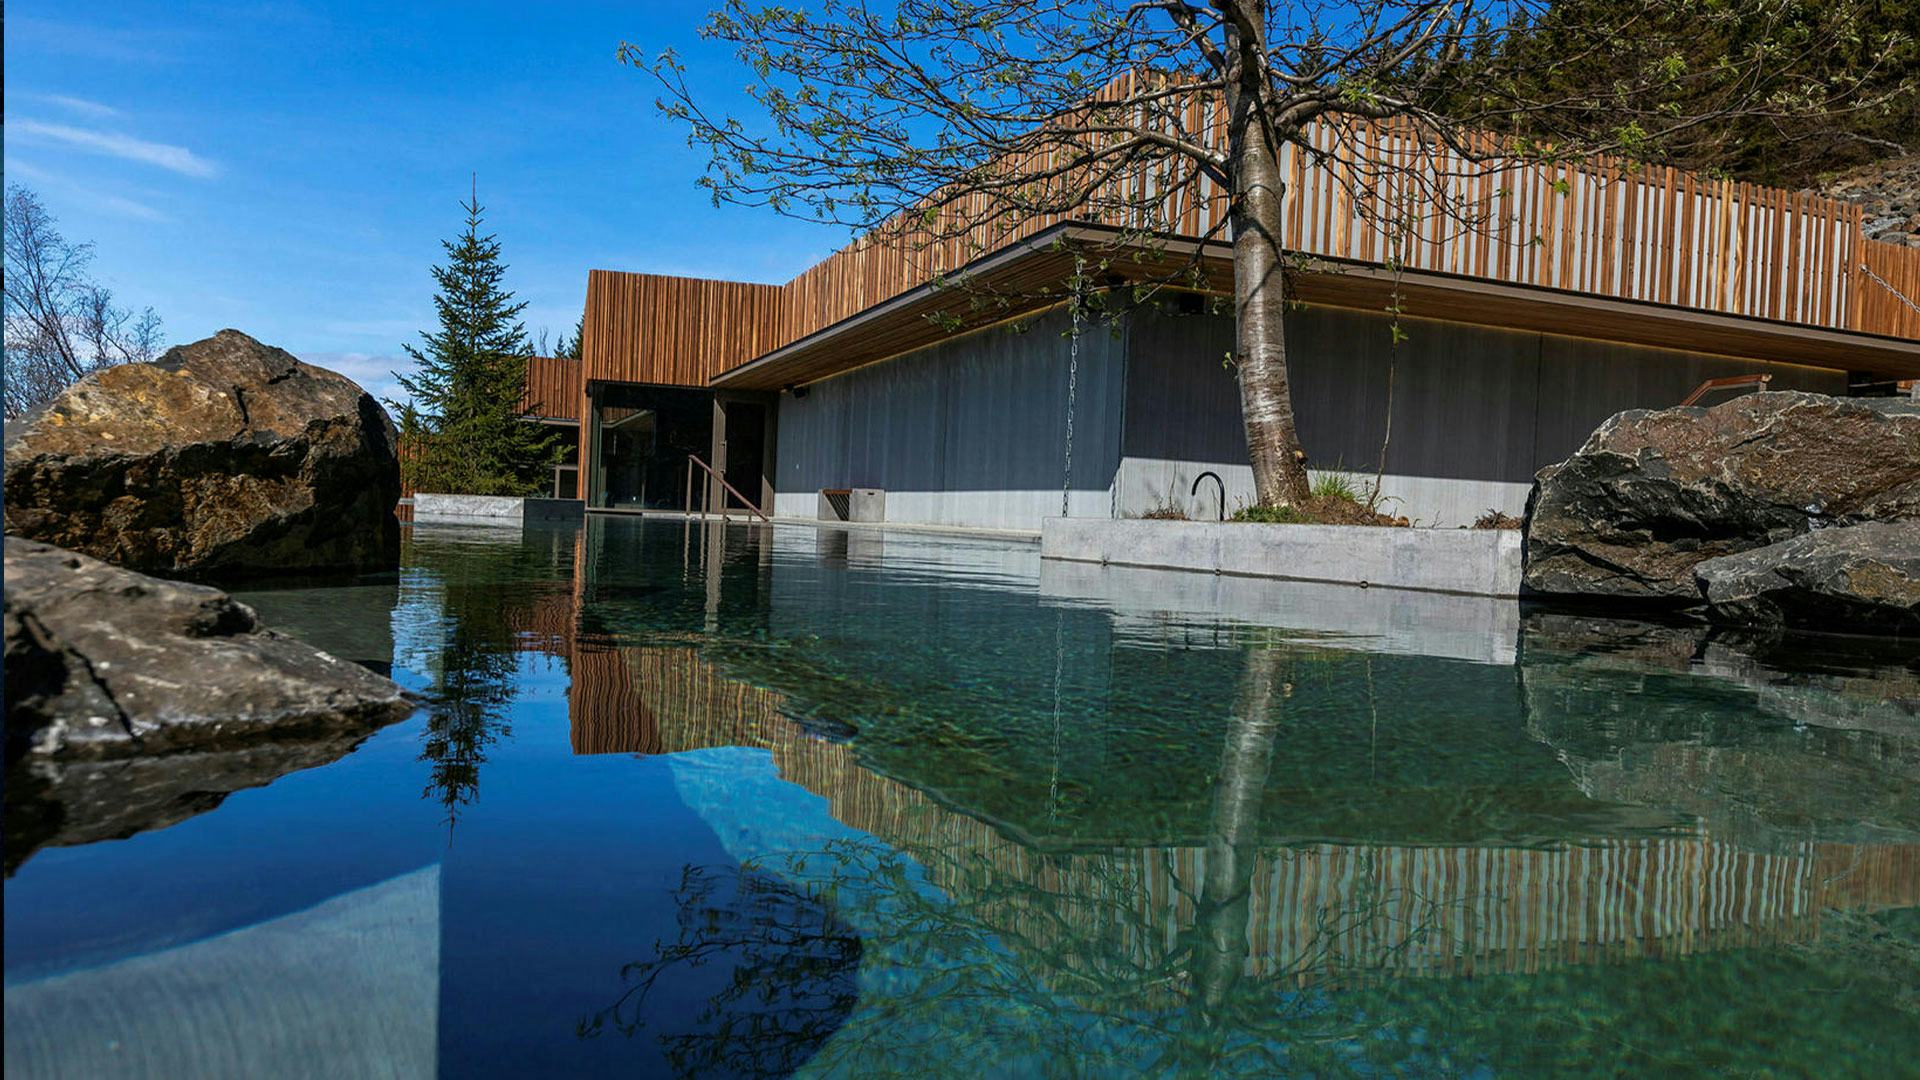 reflection of a wooden roof building on a pool and giant rocks placed around it